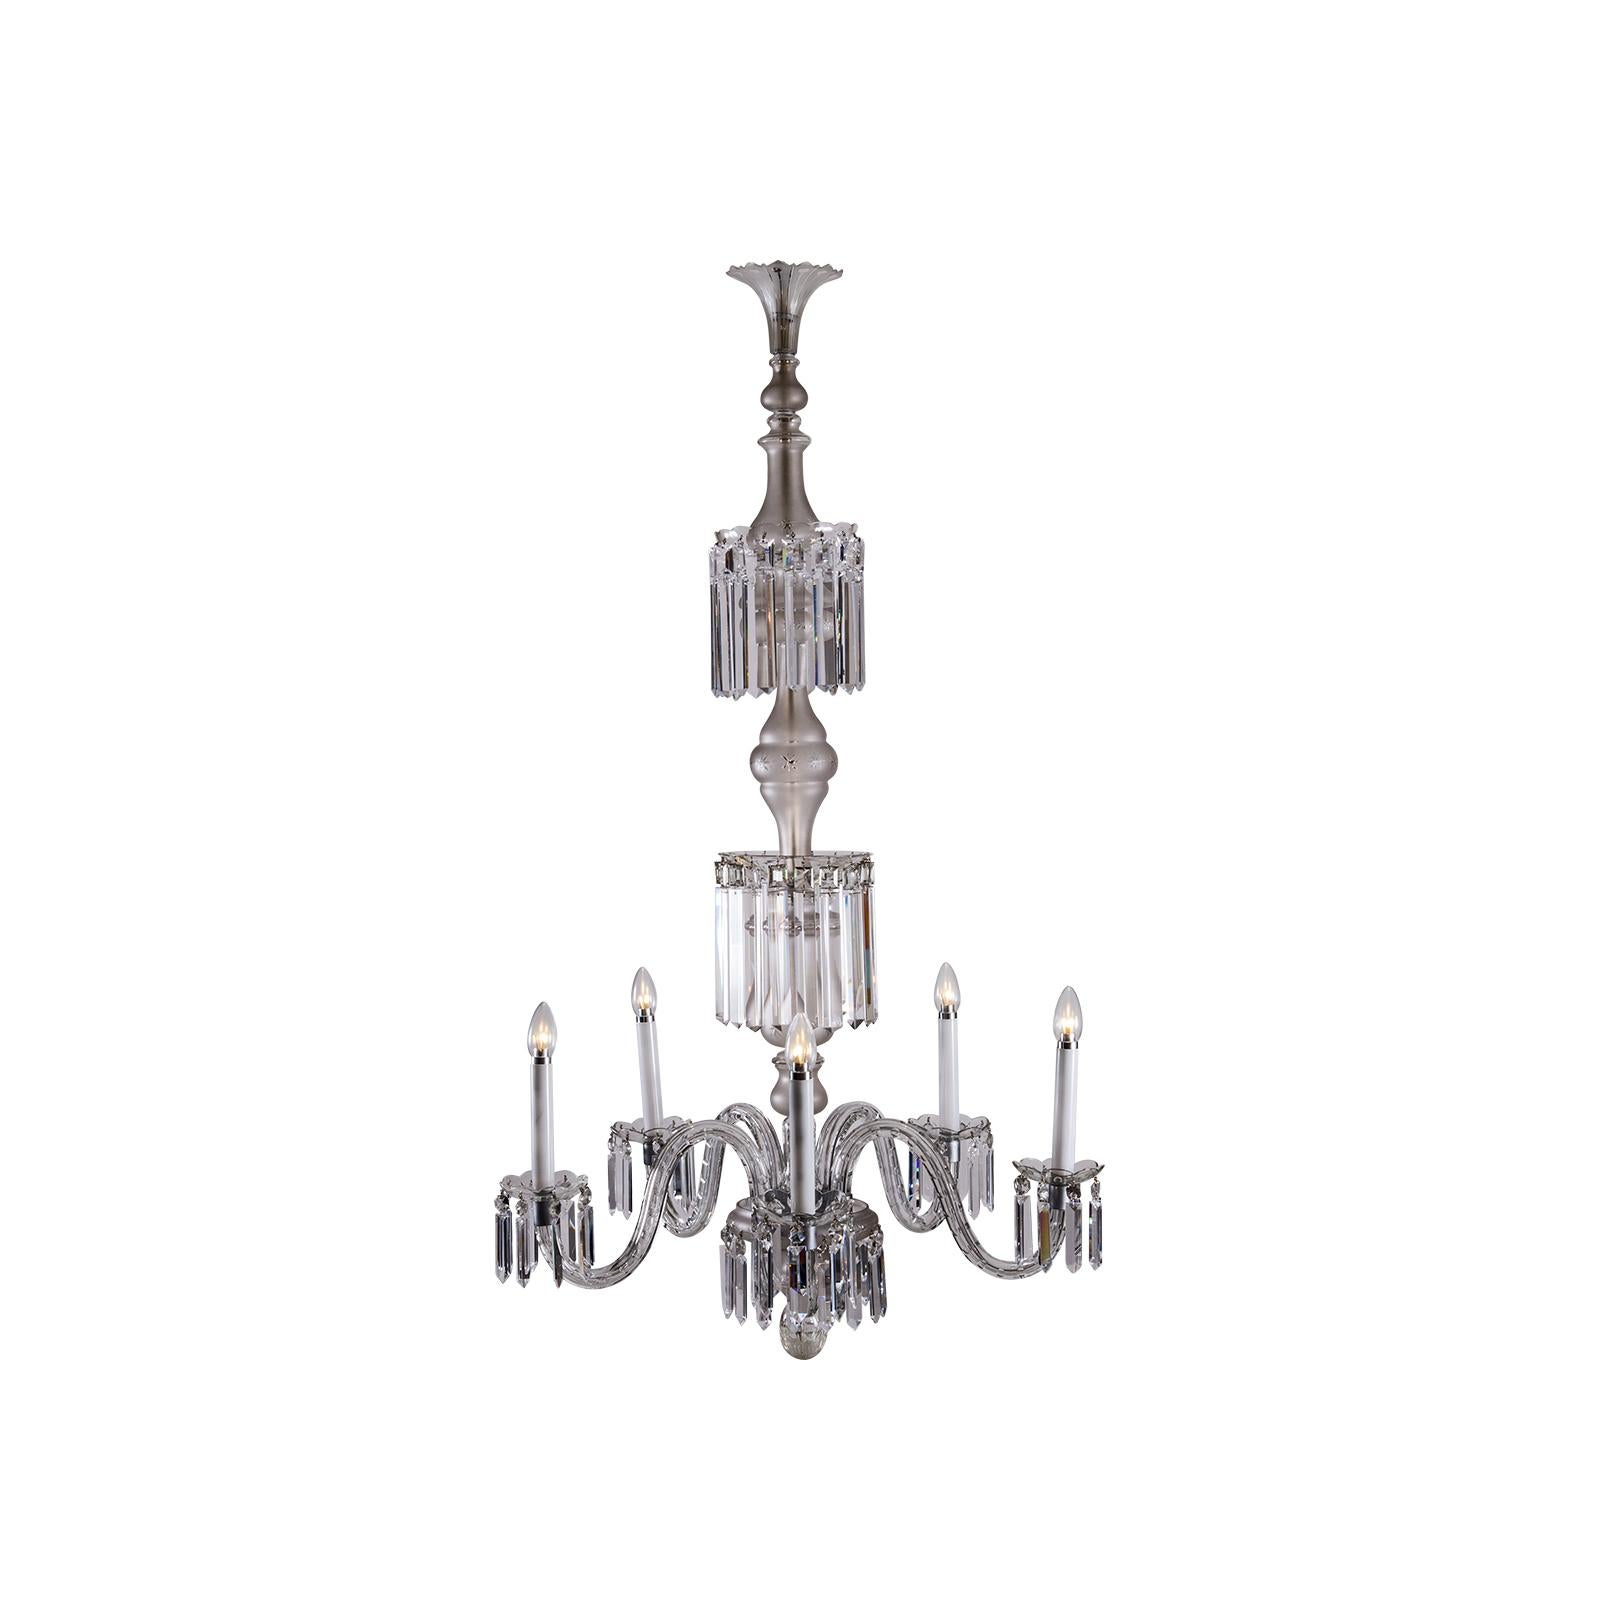 Hand-Crafted Original Mid-Century Modern Elegant Austrian Glass Chandelier and Wall Lamp For Sale